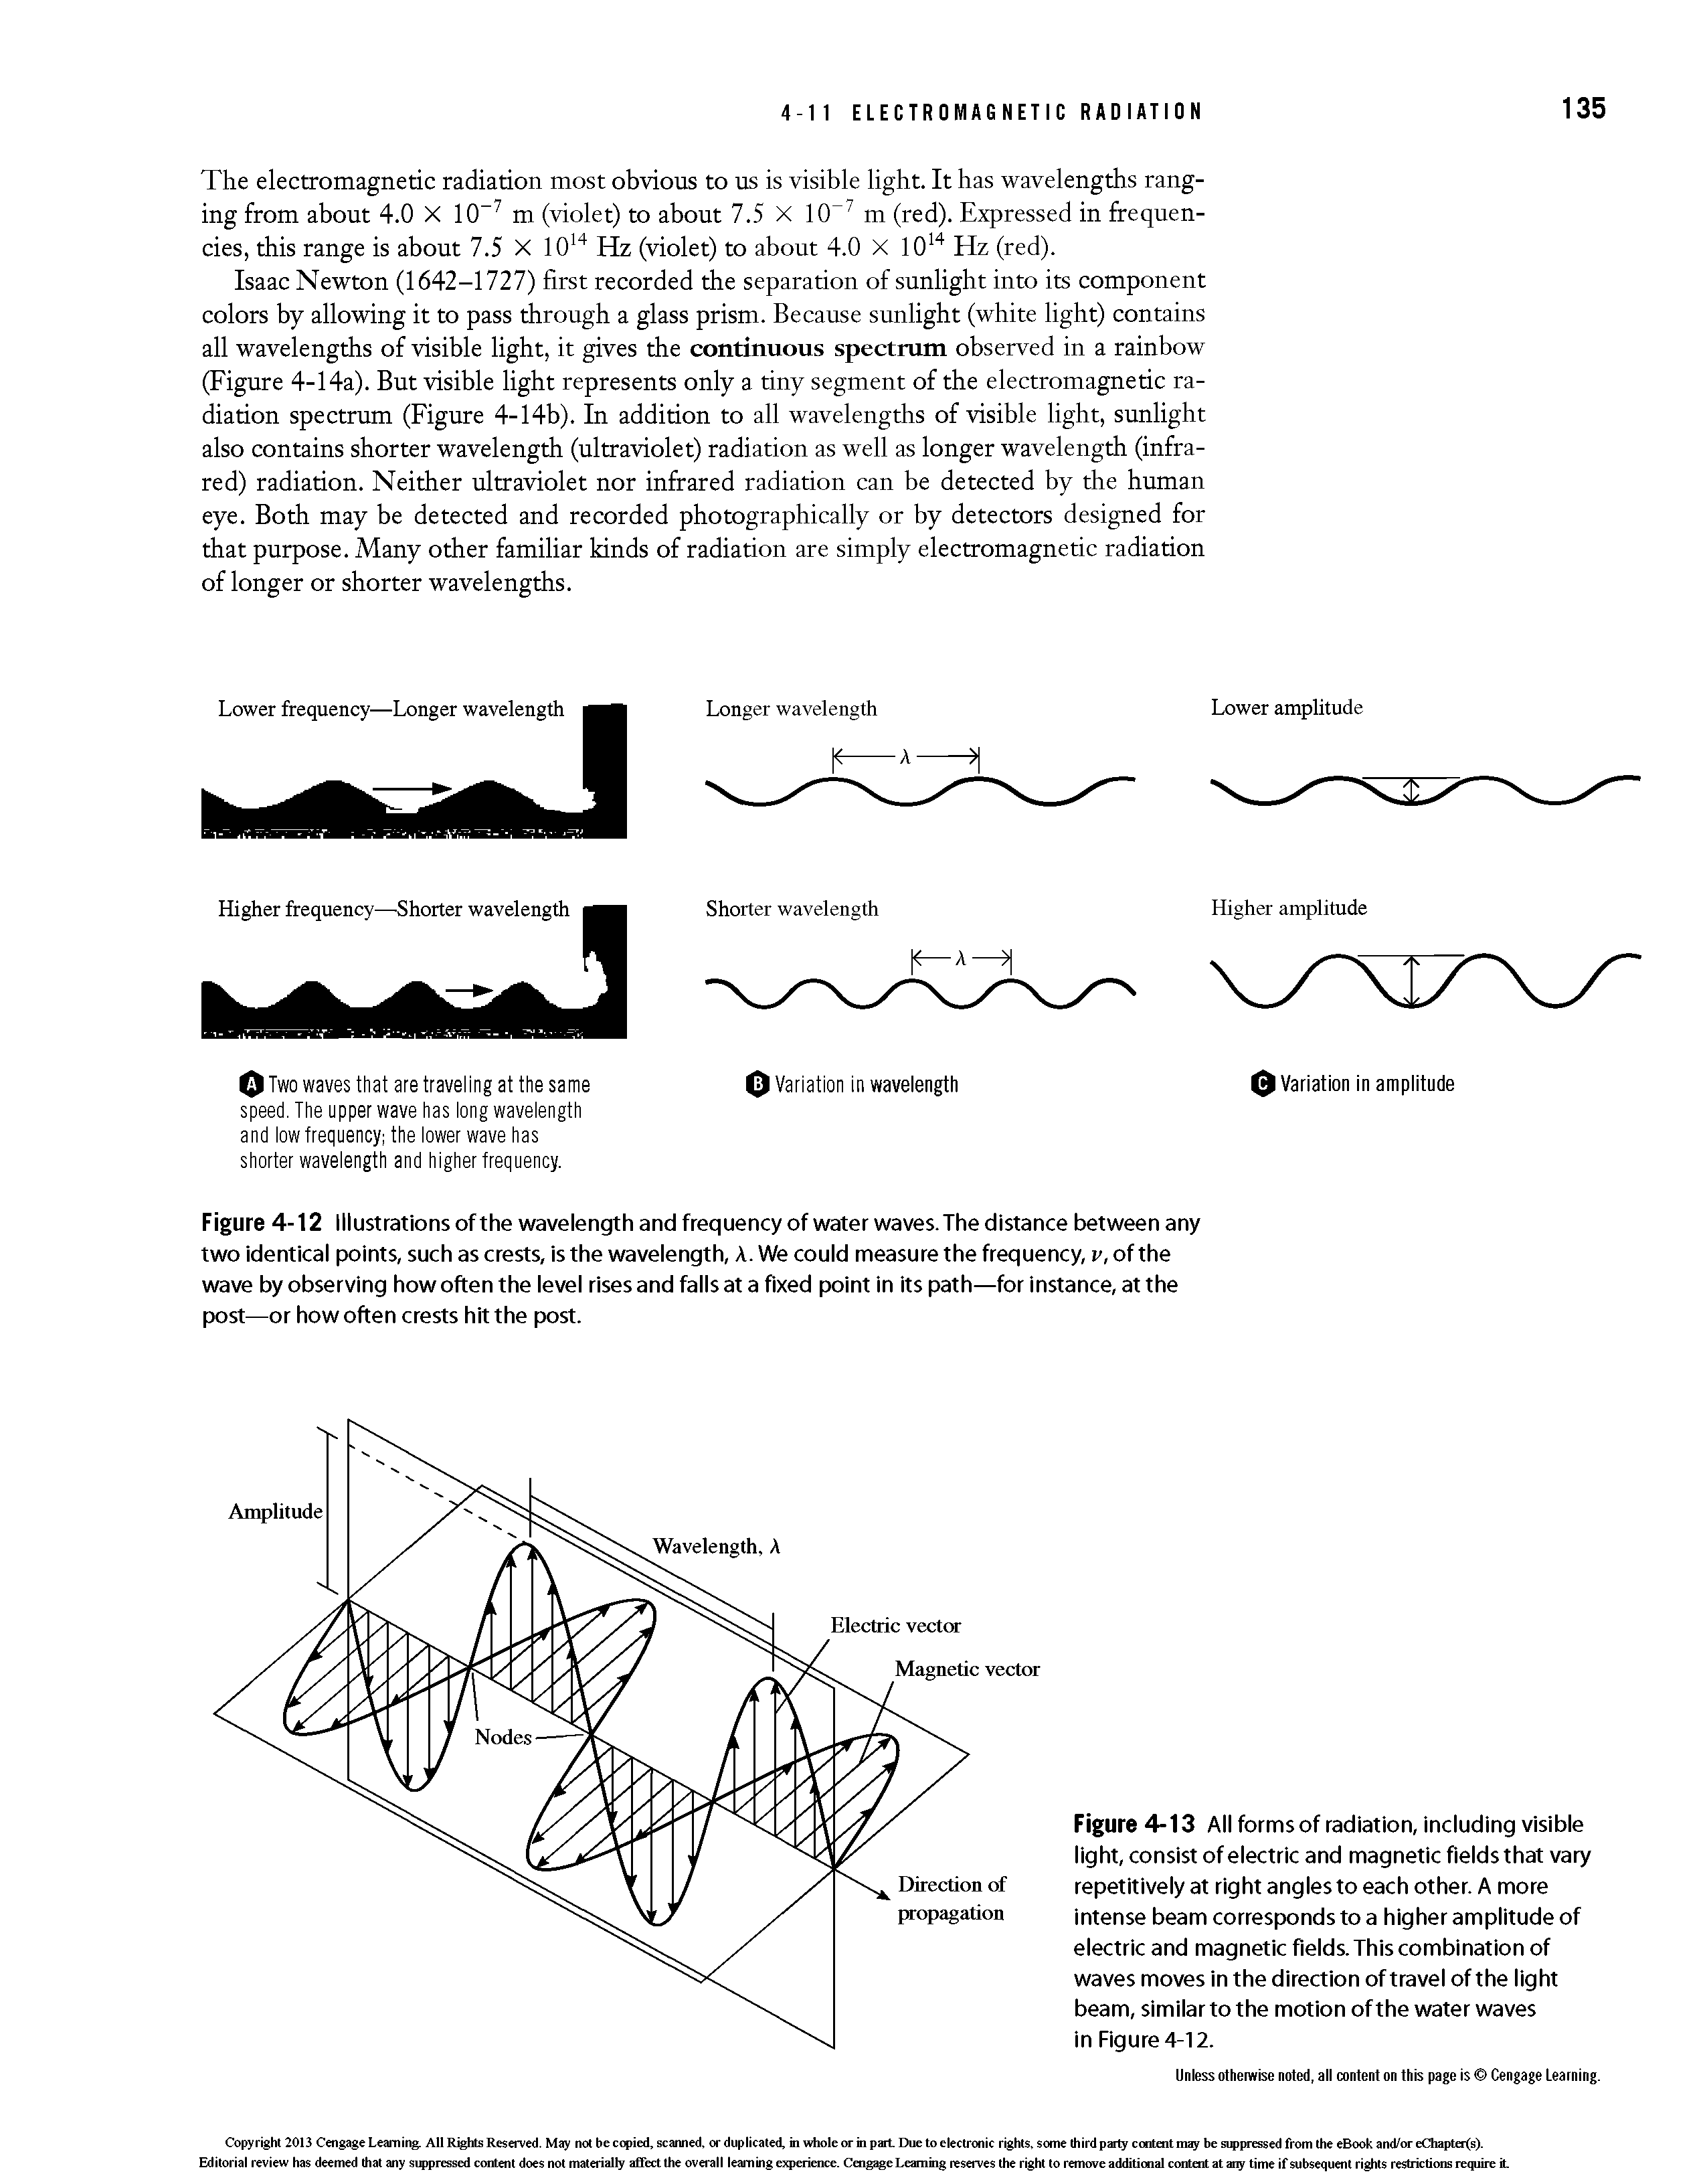 Figure 4-12 Illustrations of the wavelength and frequency of water waves. The distance between any two identical points, such as crests, Is the wavelength, A. We could measure the frequency, v, of the wave by observing how often the level rises and falls at a fixed point In its path—for instance, at the post—or how often crests hit the post.